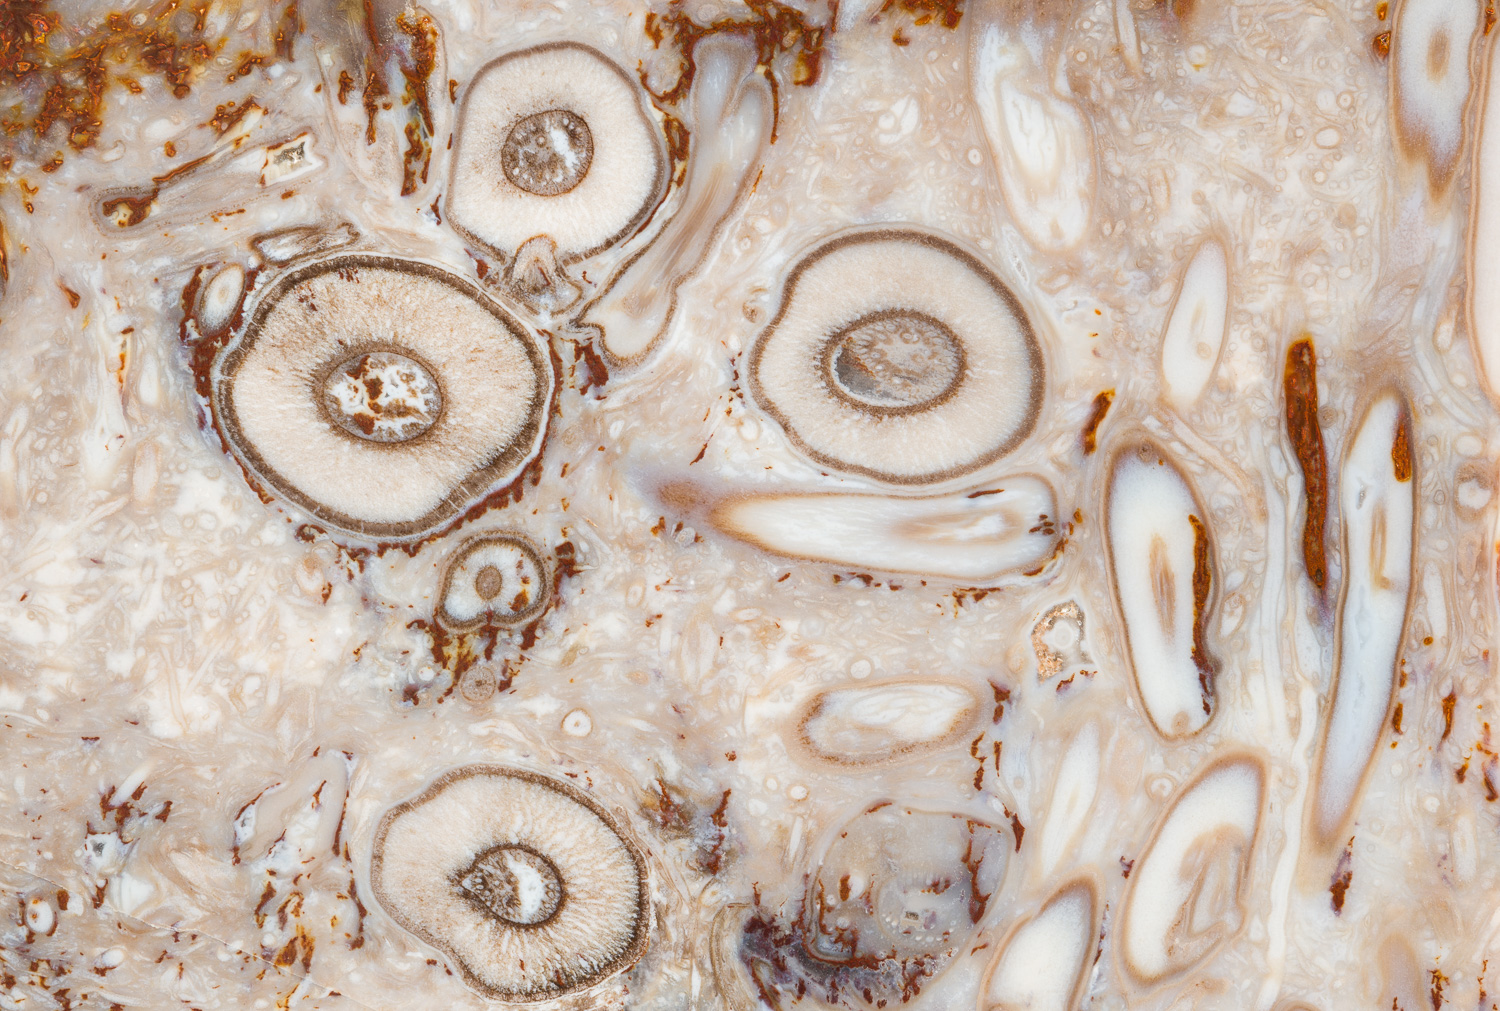 Macrophotograph of a palm root fossil showing its venous structure. Image #3730